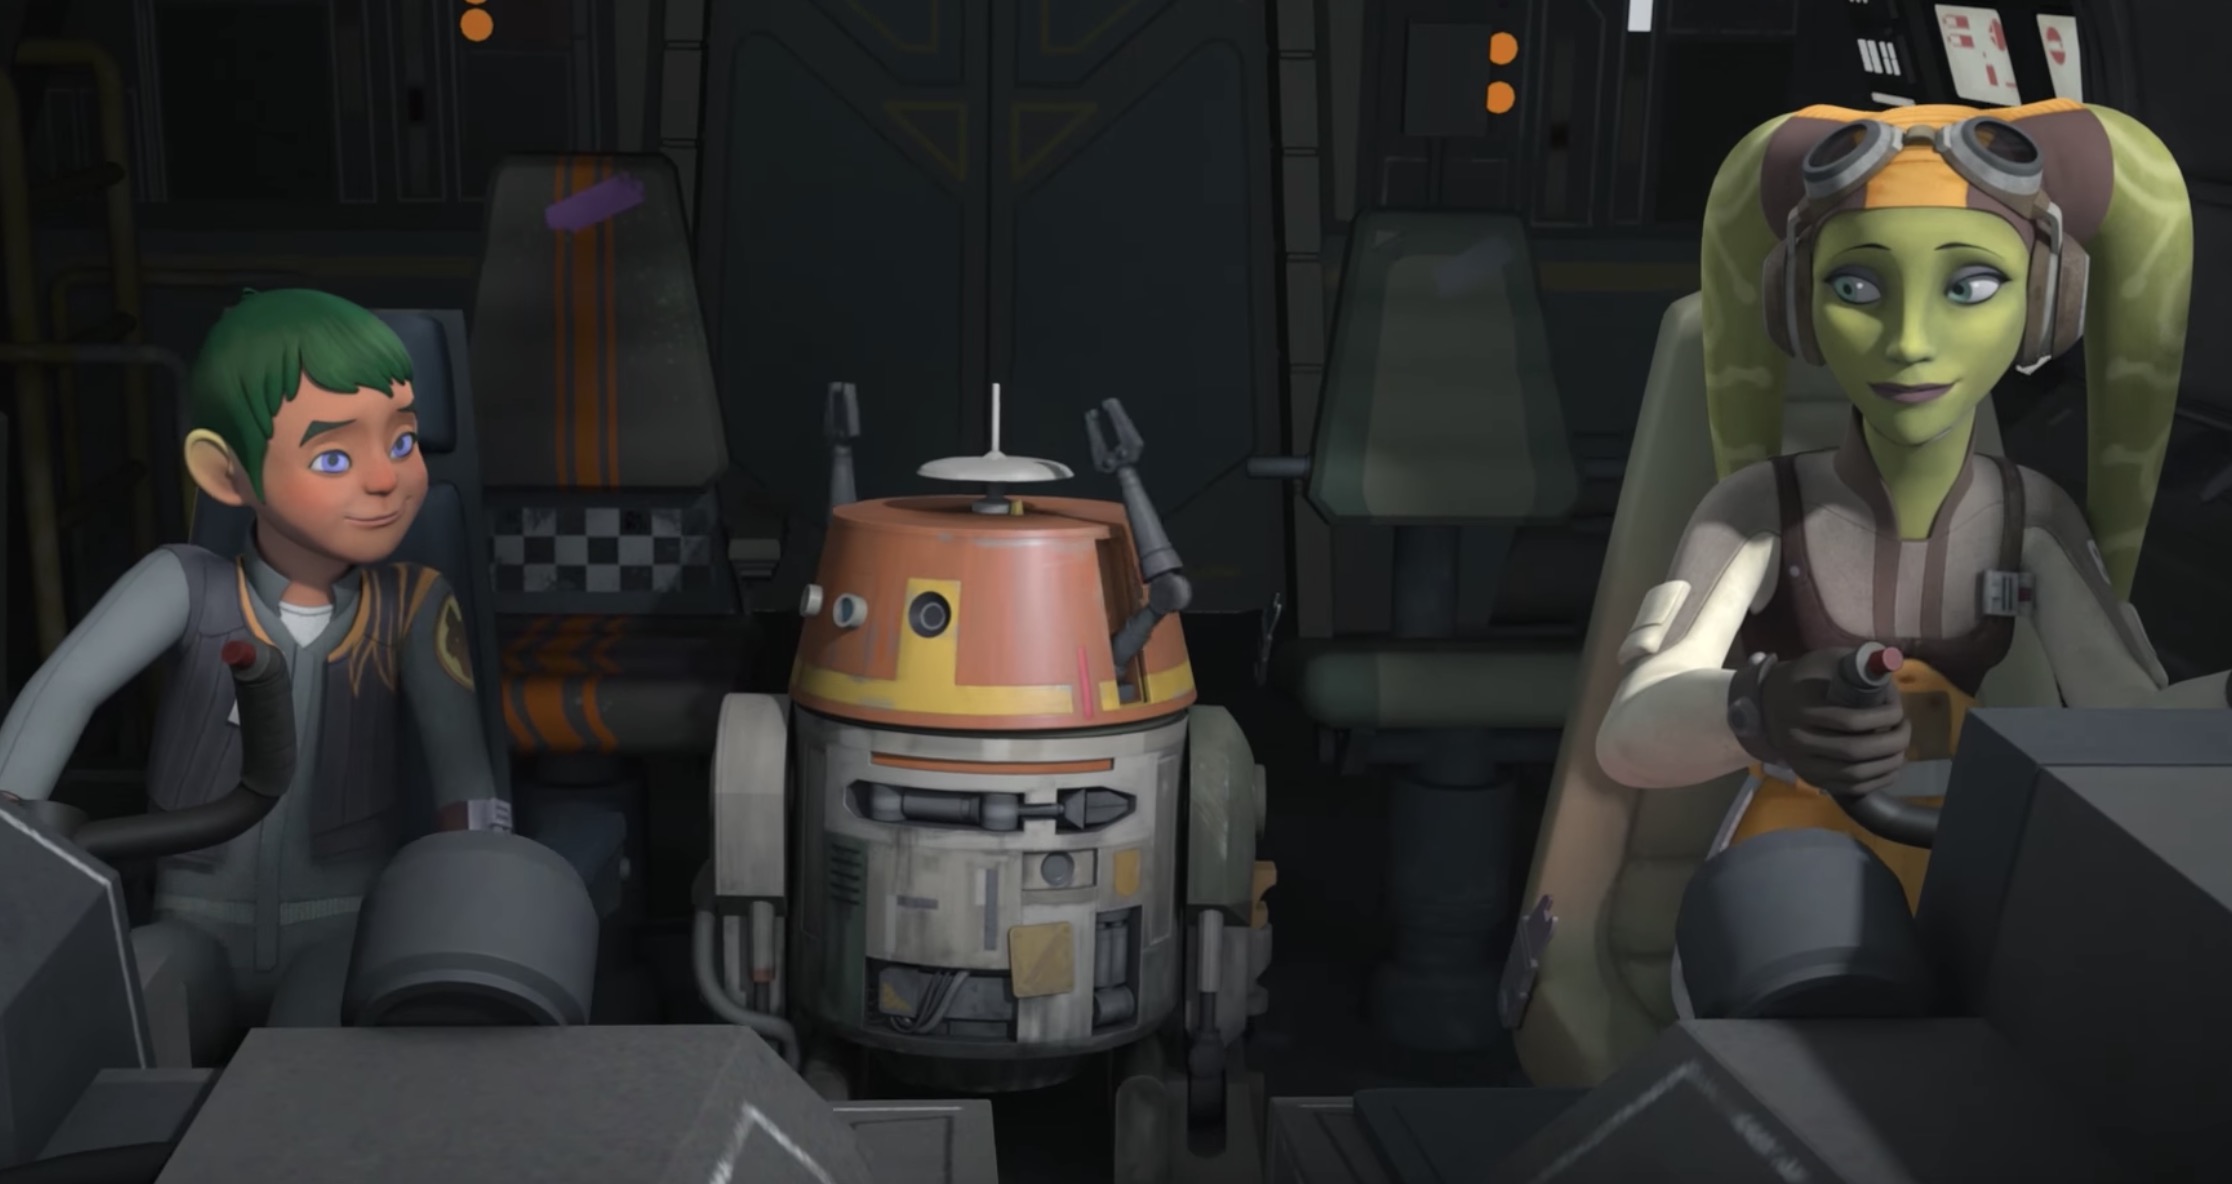 We Tackle Your Burning Questions After The Star Wars Rebels Finale